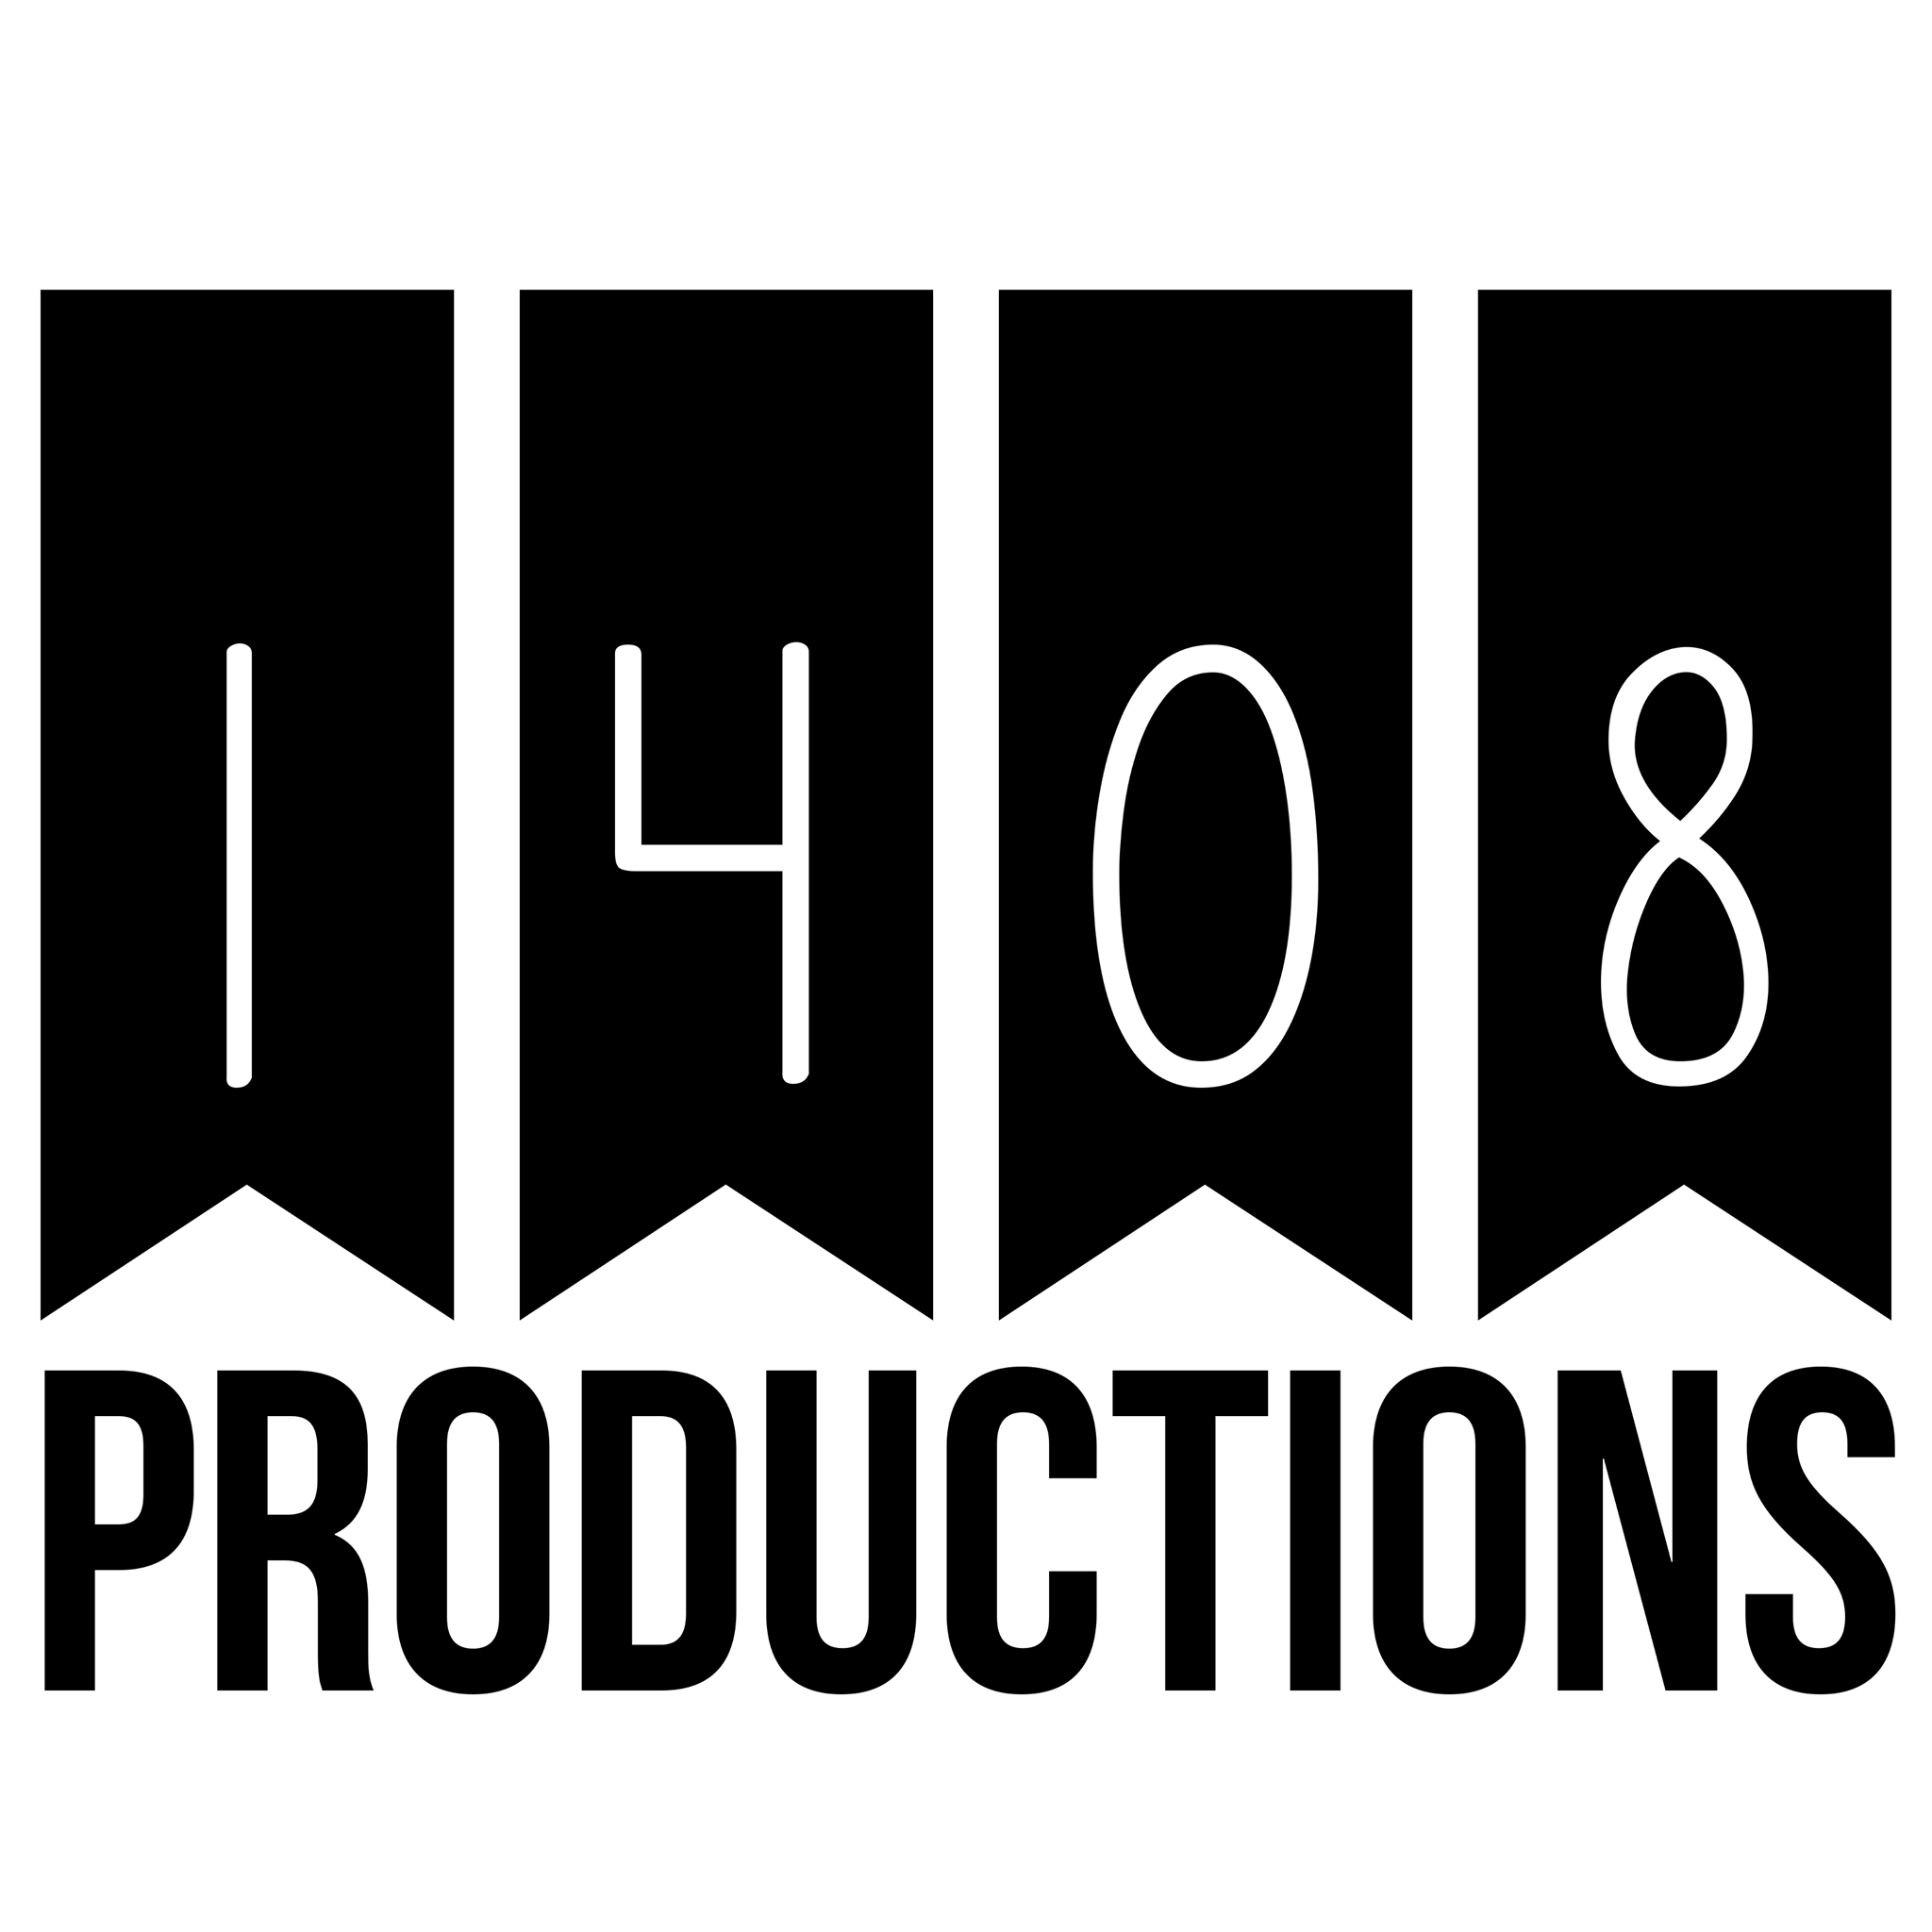 1408 Productions